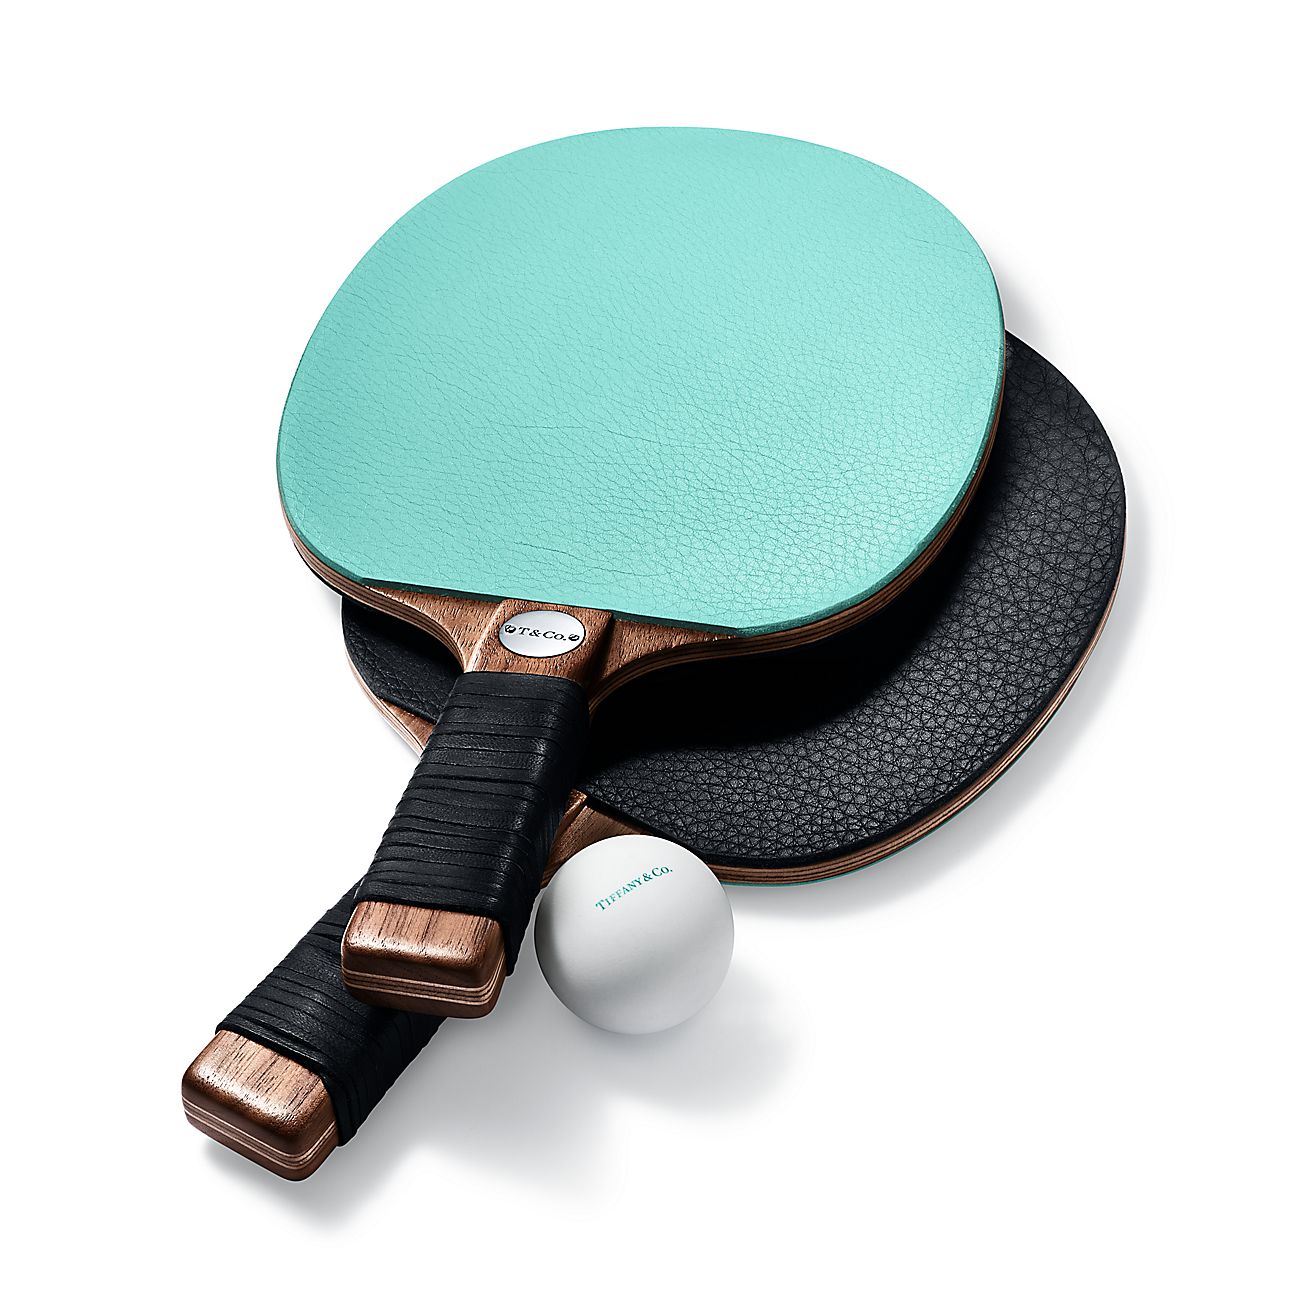 everyday-objectsleather-and-walnut-table-tennis-paddles-60561737_975115_ED.jpg